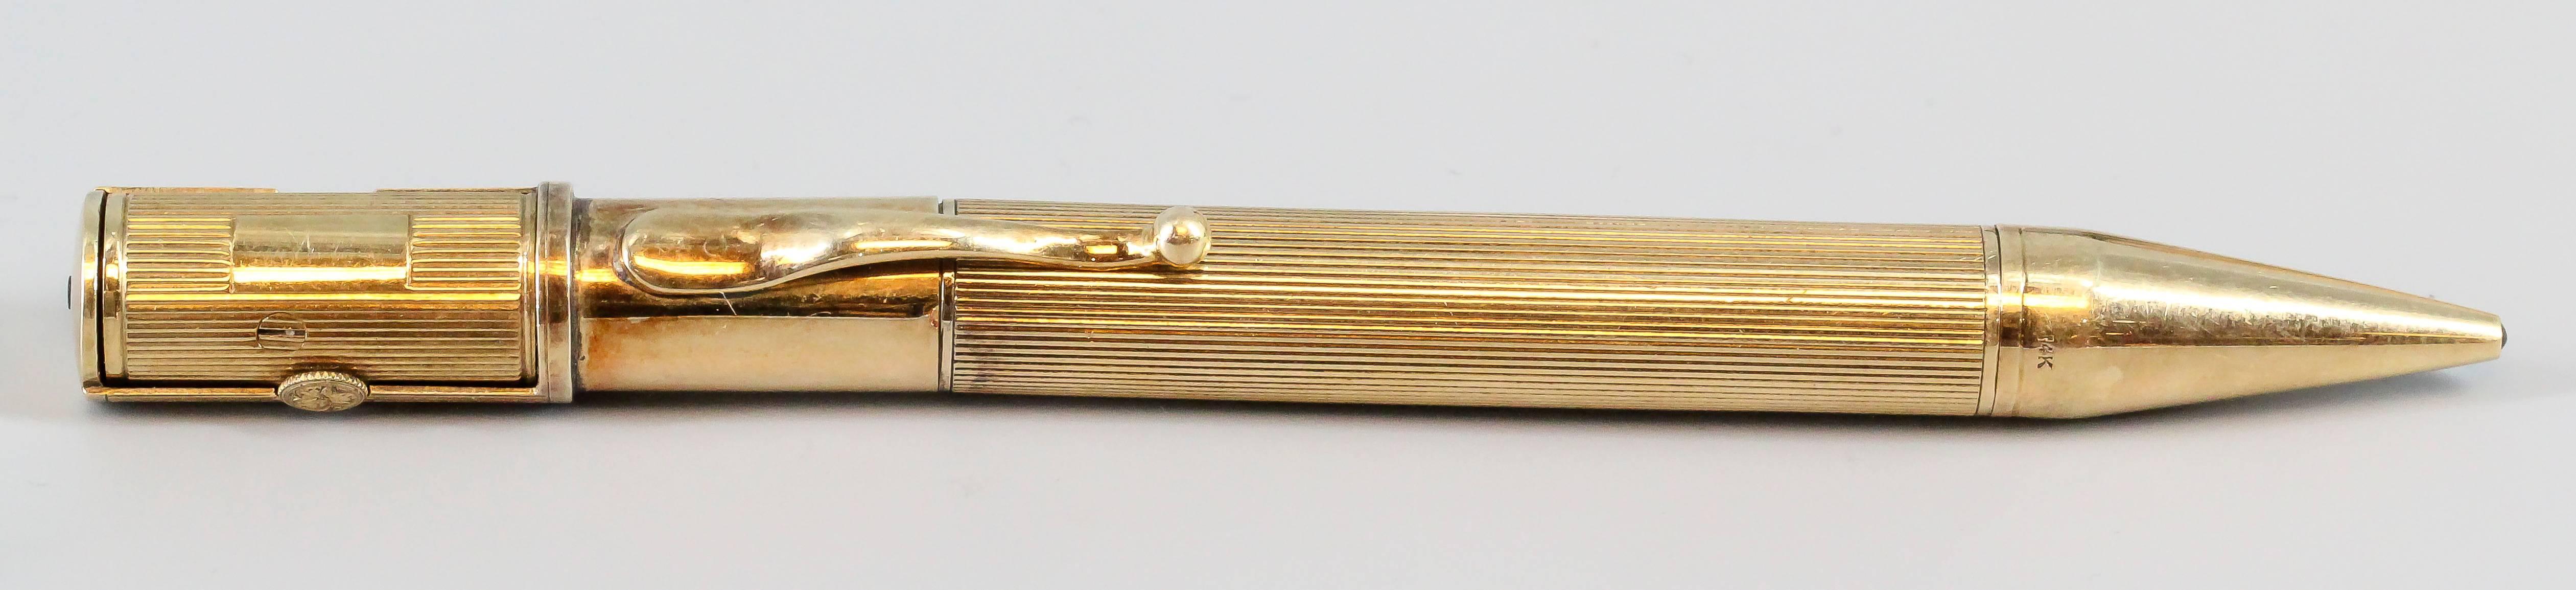 Extremely rare and unusual 14K yellow gold pencil with built-in watch, circa 1940s. Watch has a manual wind movement and simple Arabic numerals; dial signed Cartier and E. Mathey-Tissot & Co.; the watch portion also features a concealing mechanism